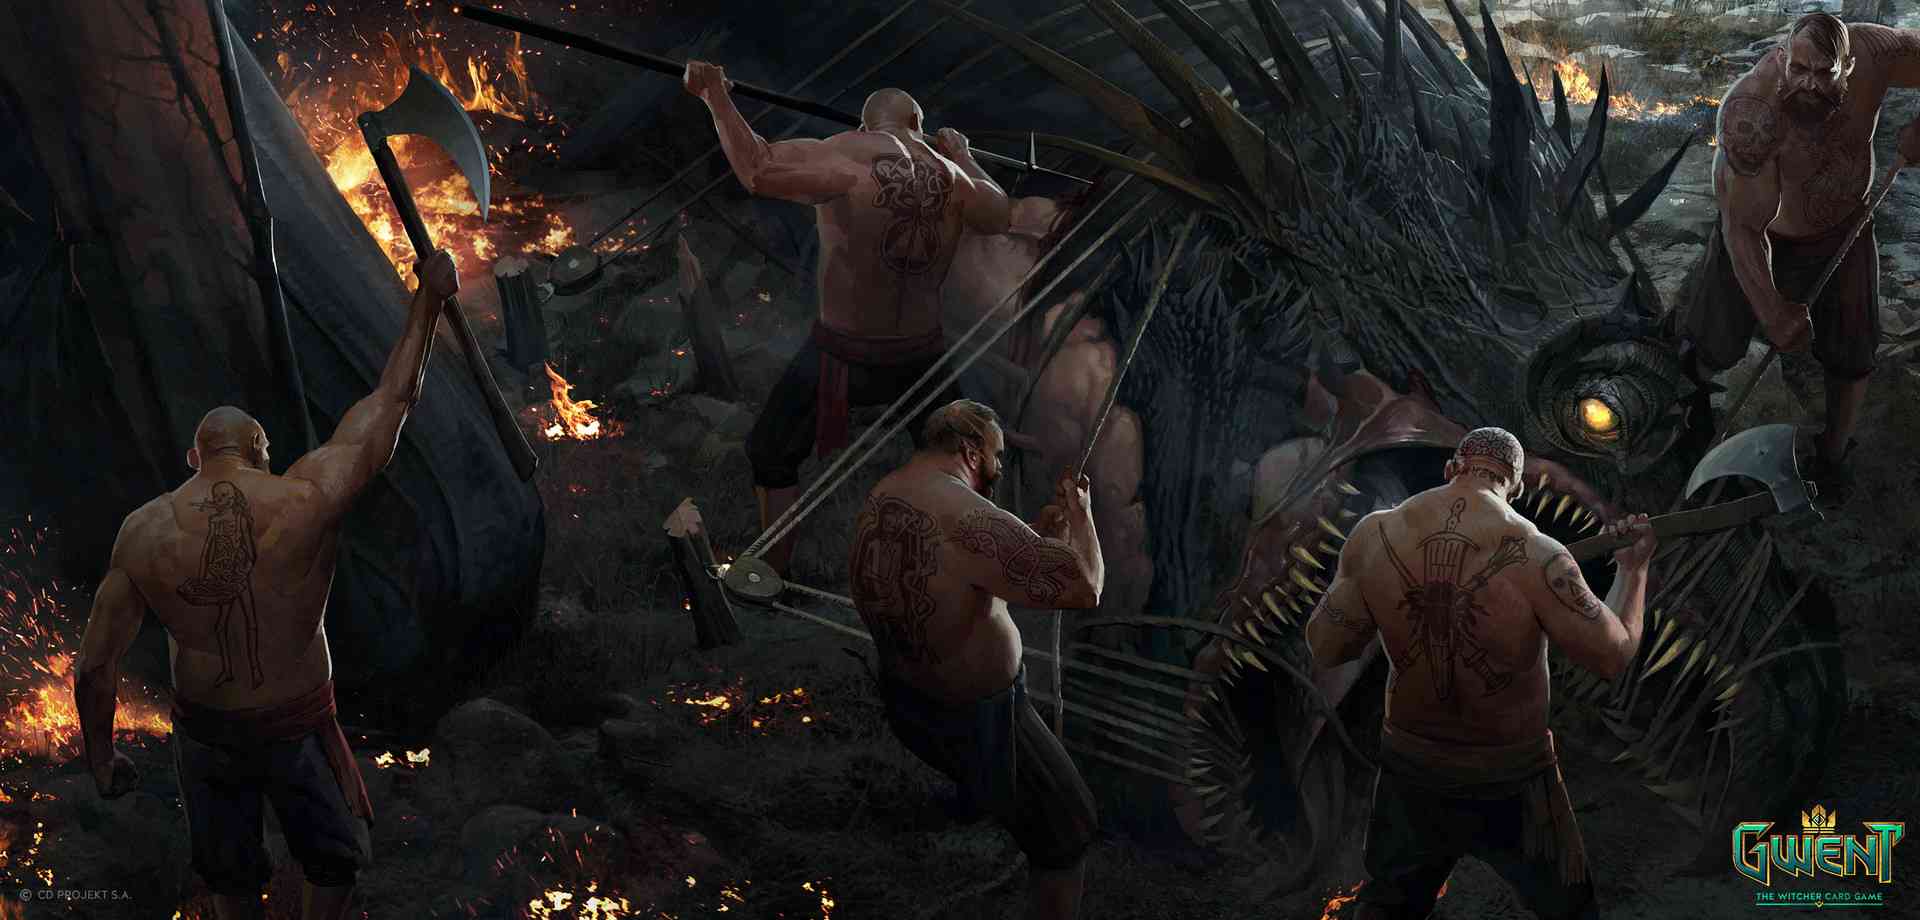 Shirtless tattooed men of the Northern Realms pin down a drake with their iron axes in art created by Bartlomiejj Gawel for the card Crinfrid Reavers Dragon Hunter in Gwent